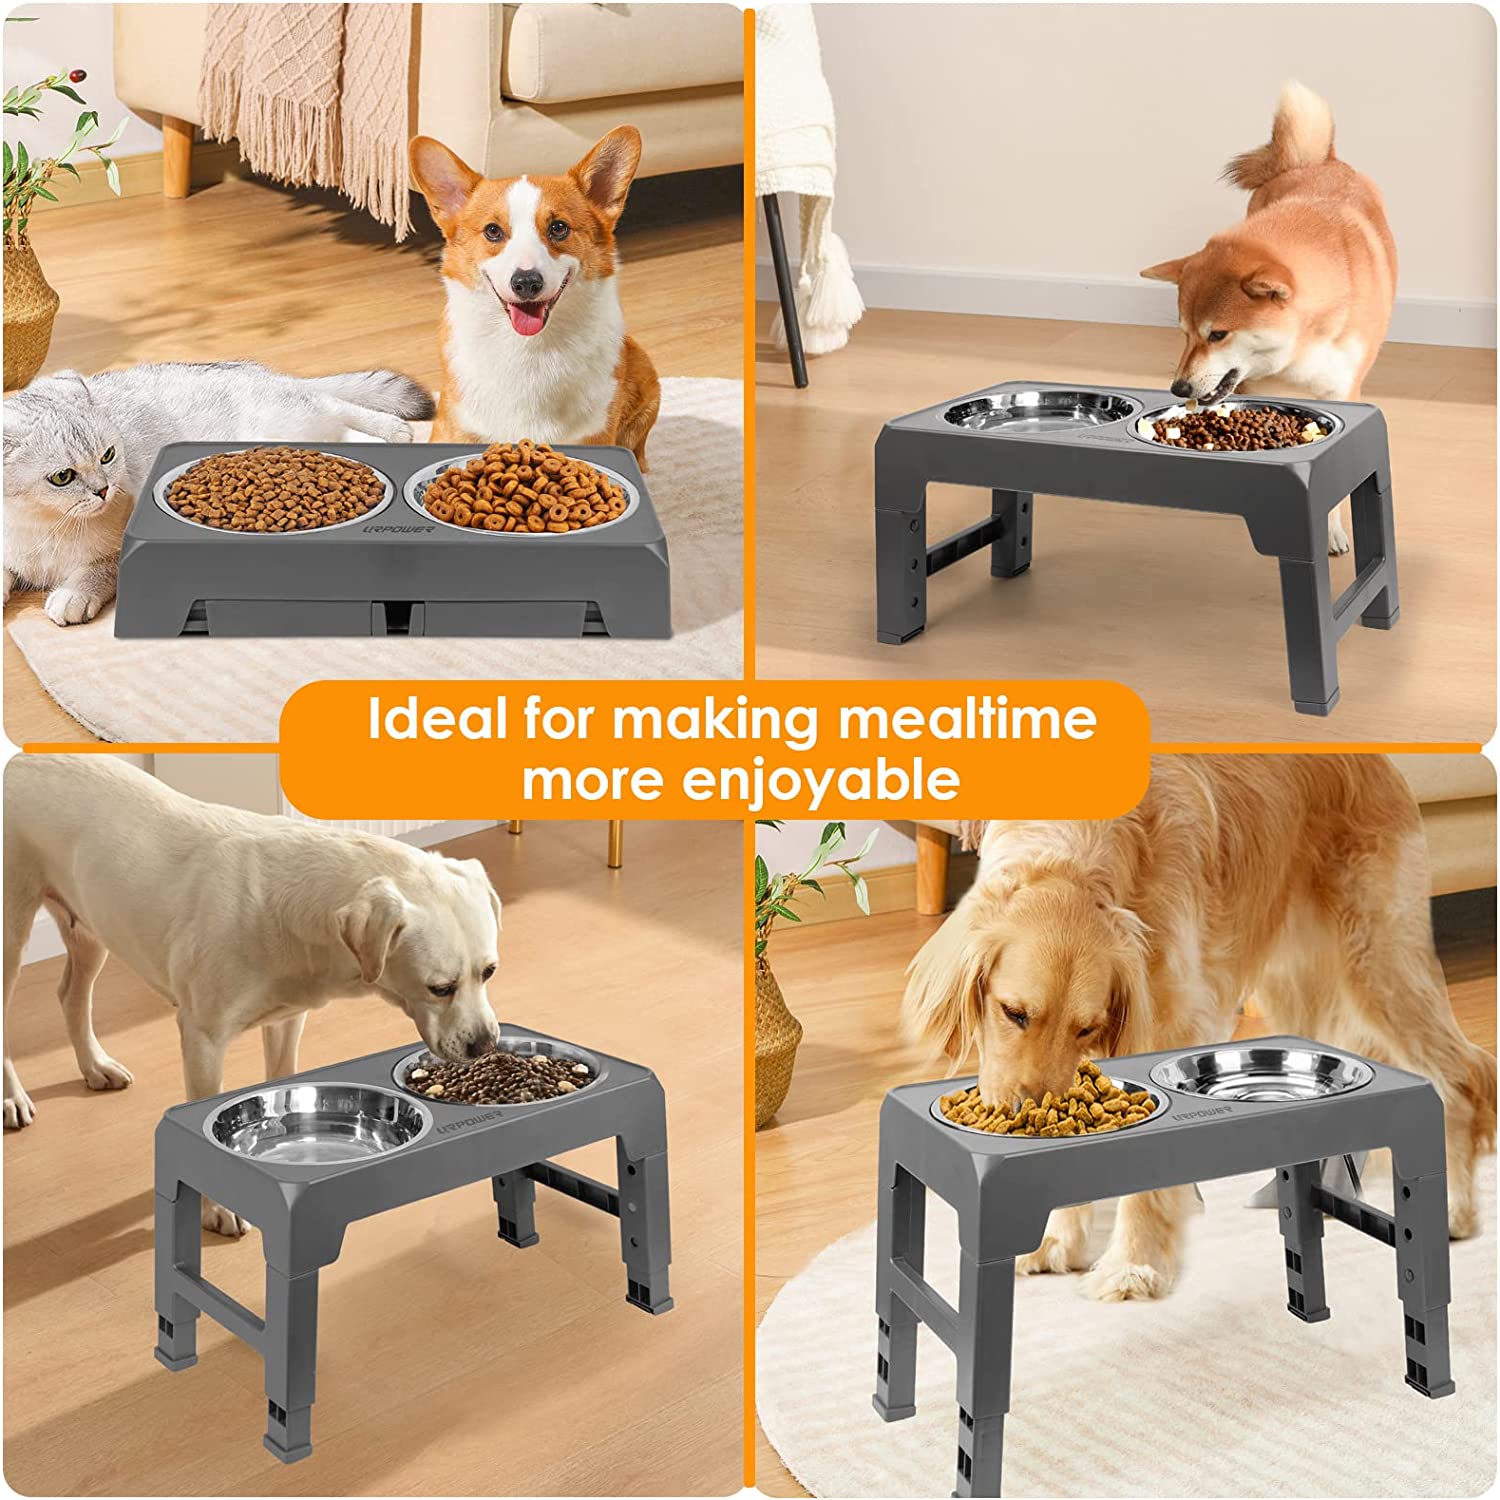 KUTKUT Elevated Dog Bowls 4 Adjustable Heights, Raised Dog Bowl for Large Medium Small Dogs and Pets, Dog Bowl Stand with 2 Stainless Steel Dog Food Bowls, 4 Heights 3.1", 8.6", 10.2", 11.8" 